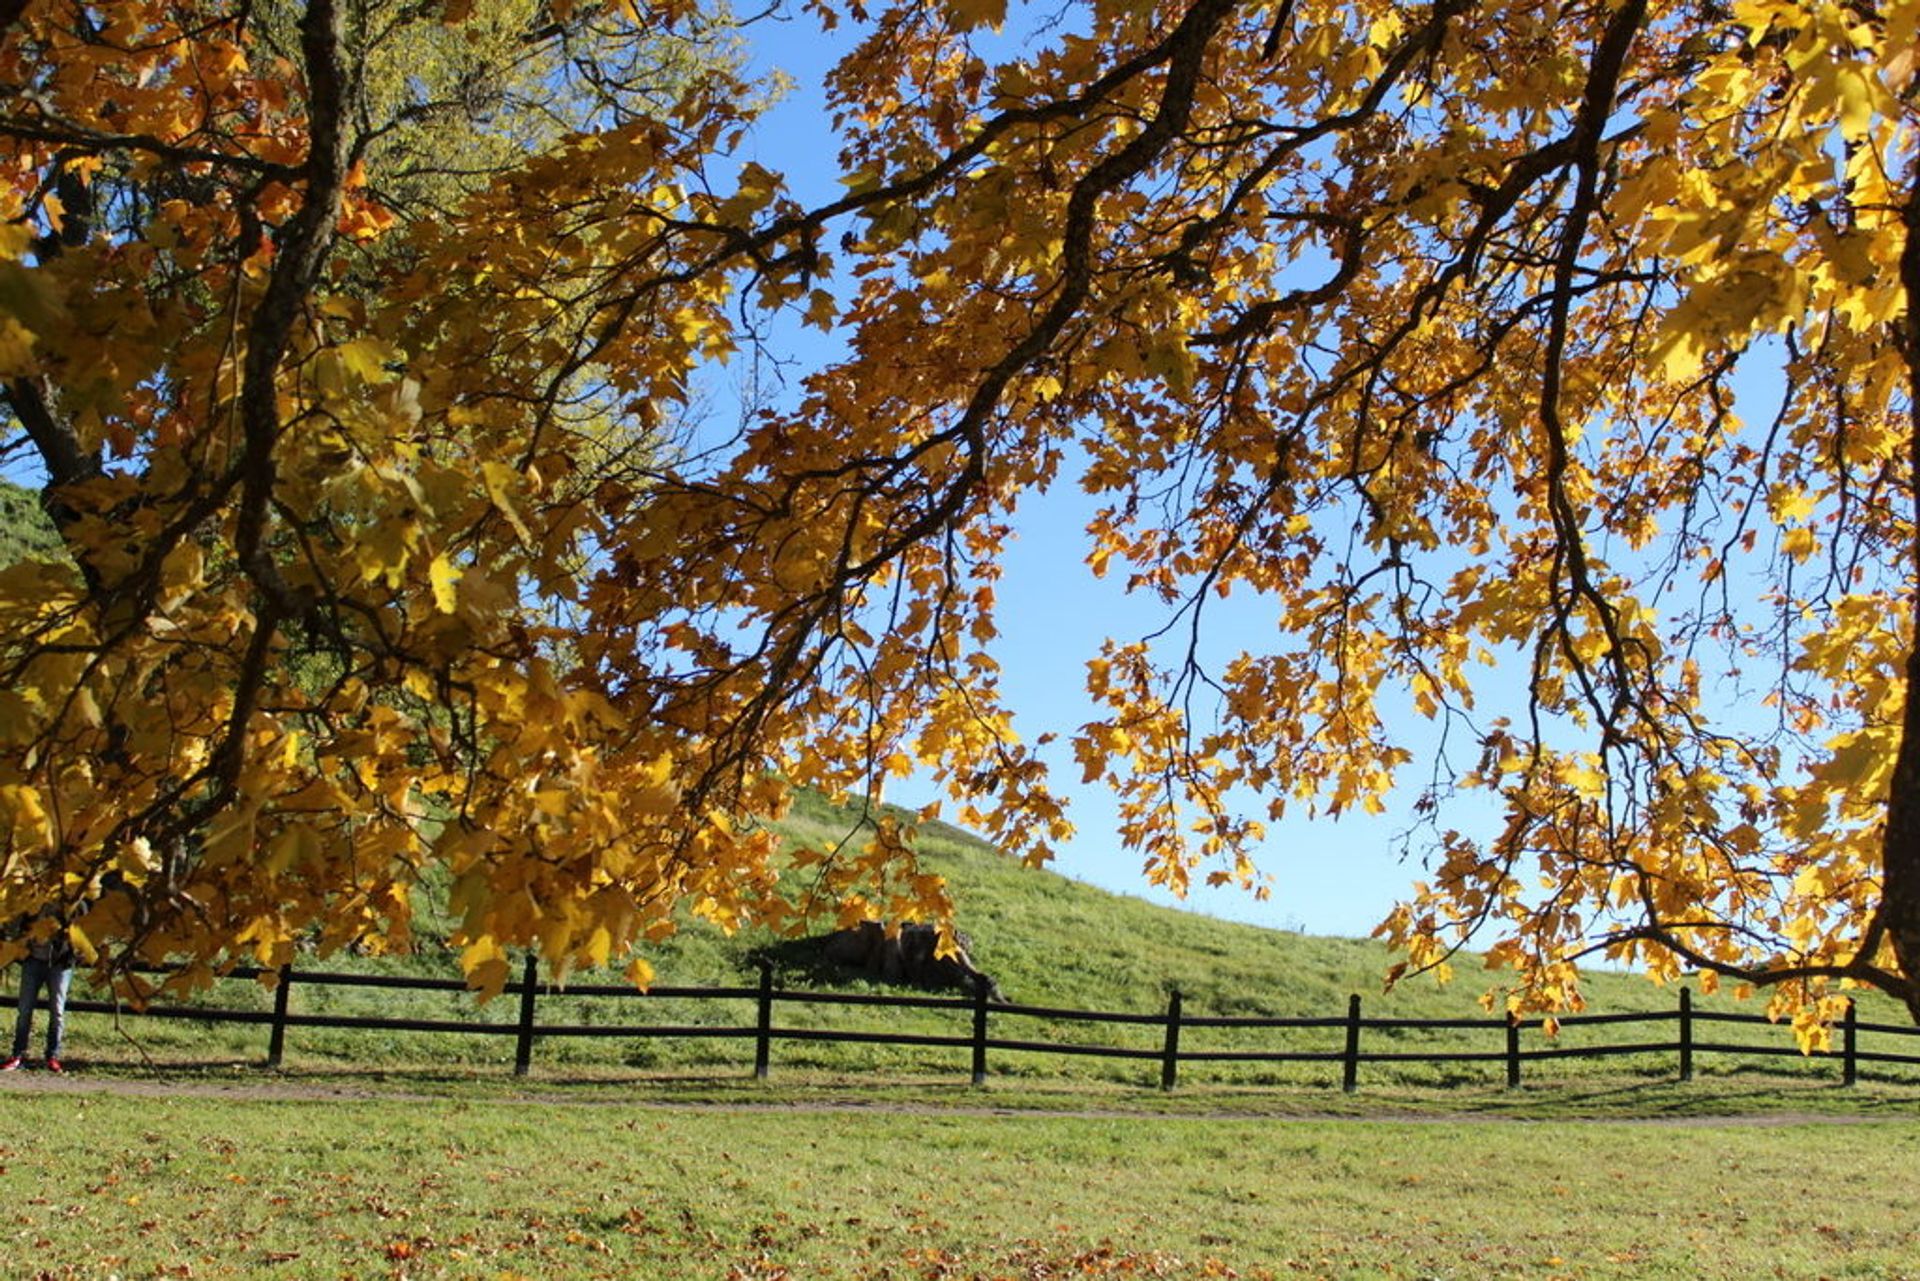 An autumn landscape. It is a tree with yellow leaves, a wooden railing and a hill in the background.